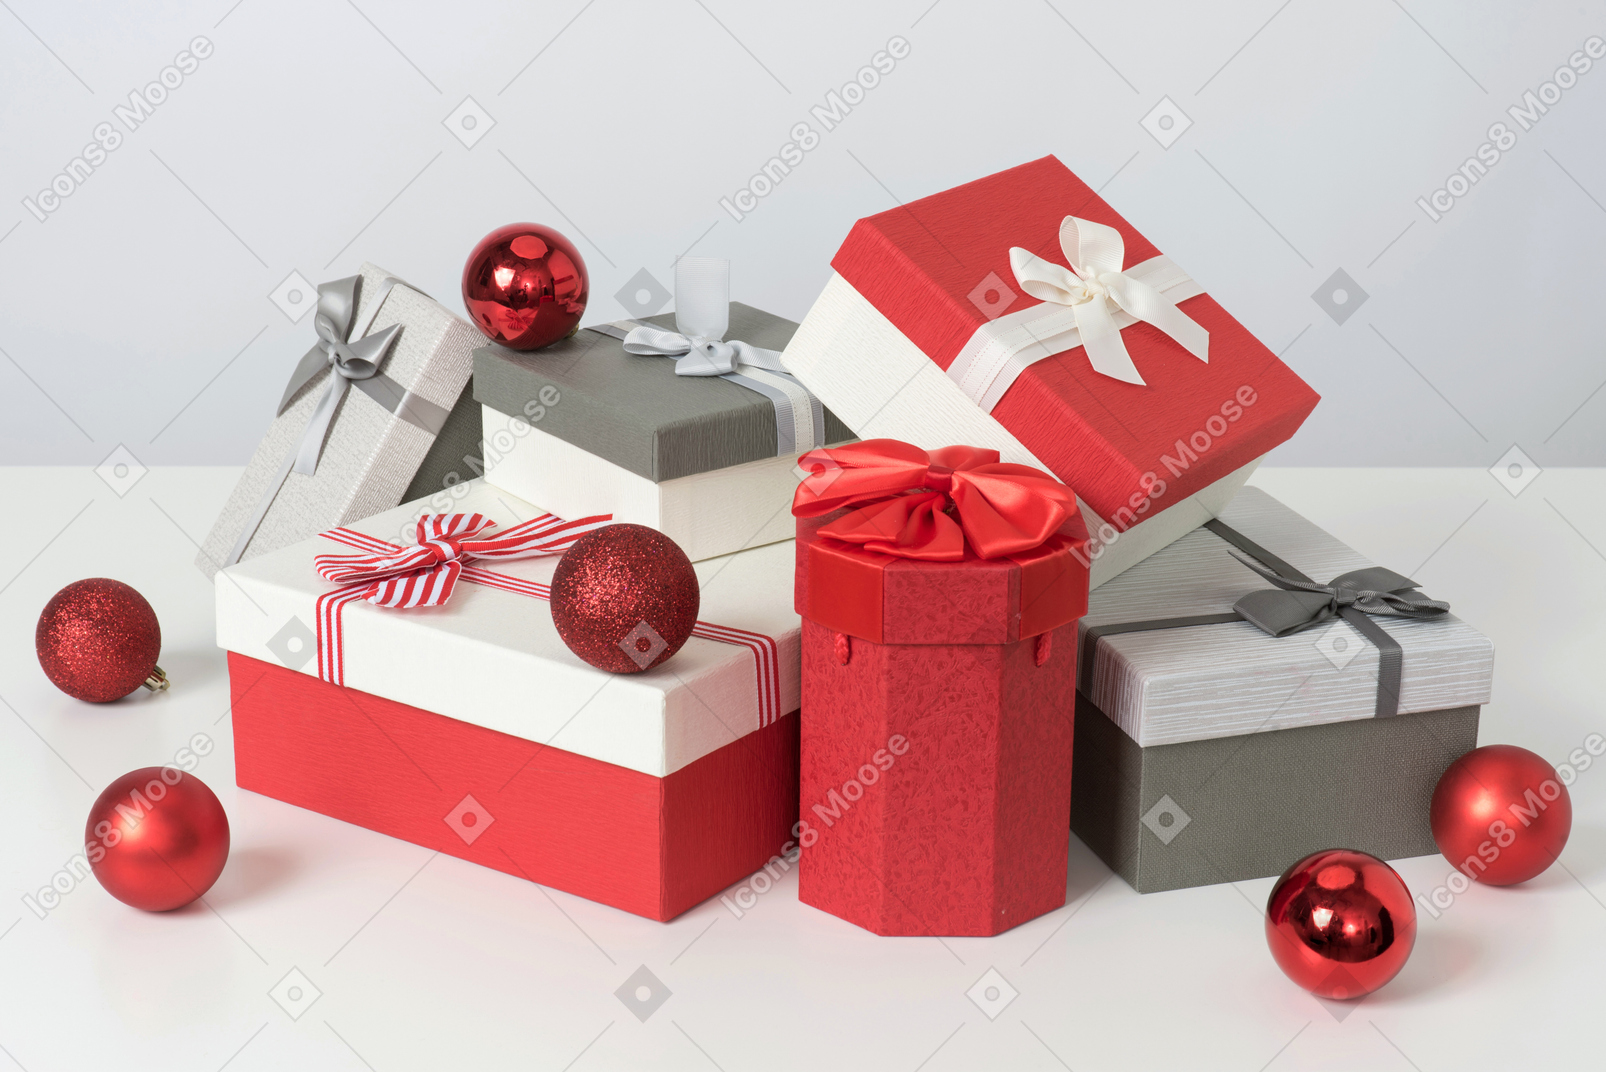 Boxes and christmas tree decorations